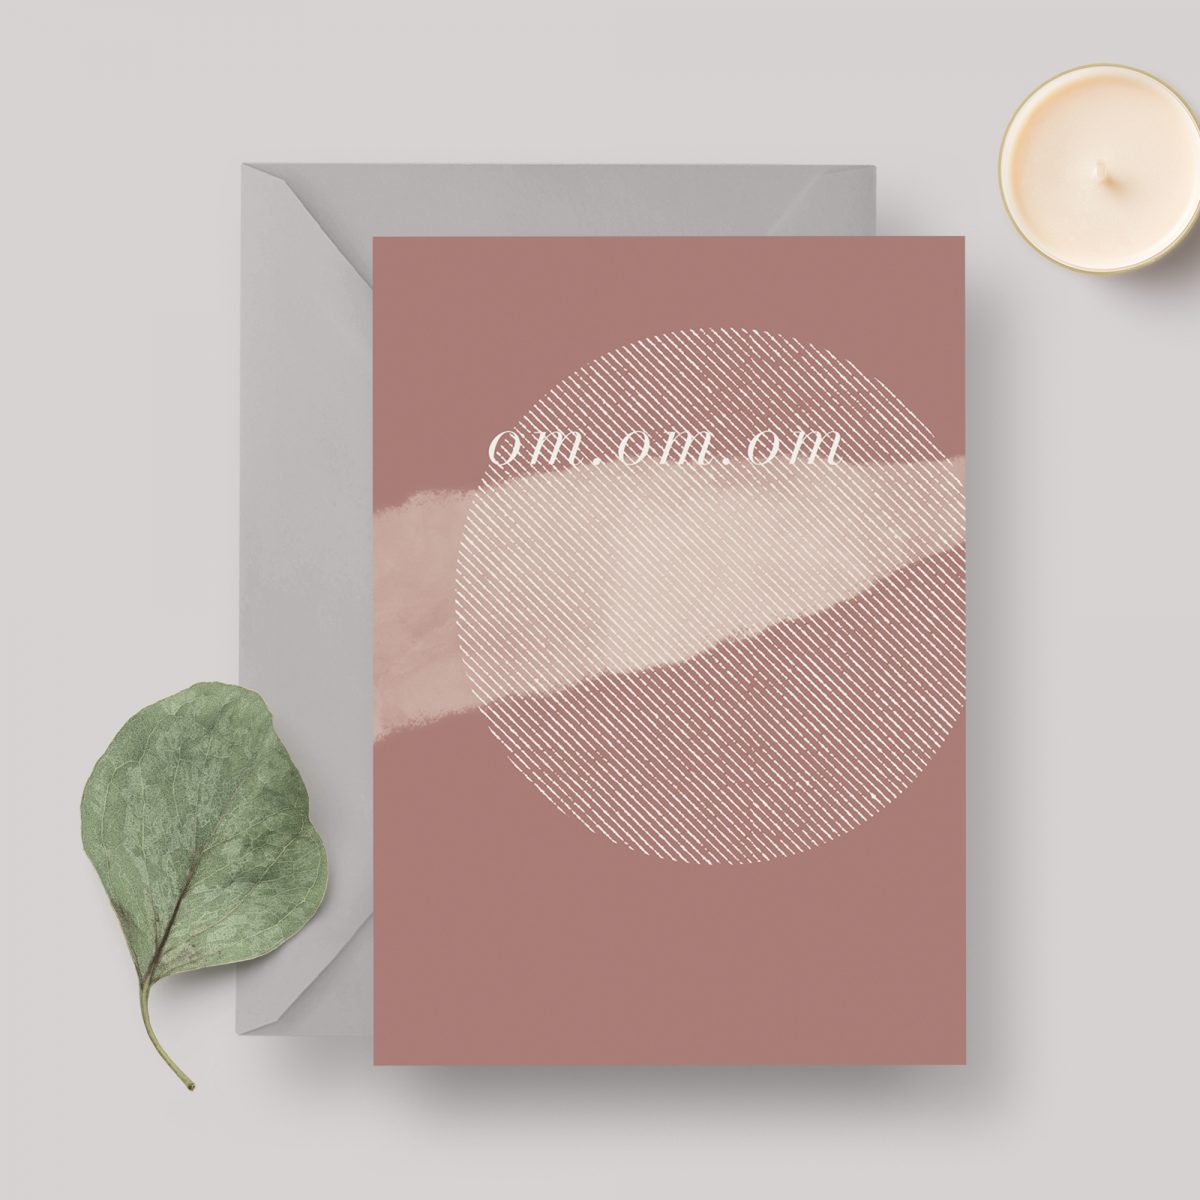 Om A6 greeting card with grey envelope